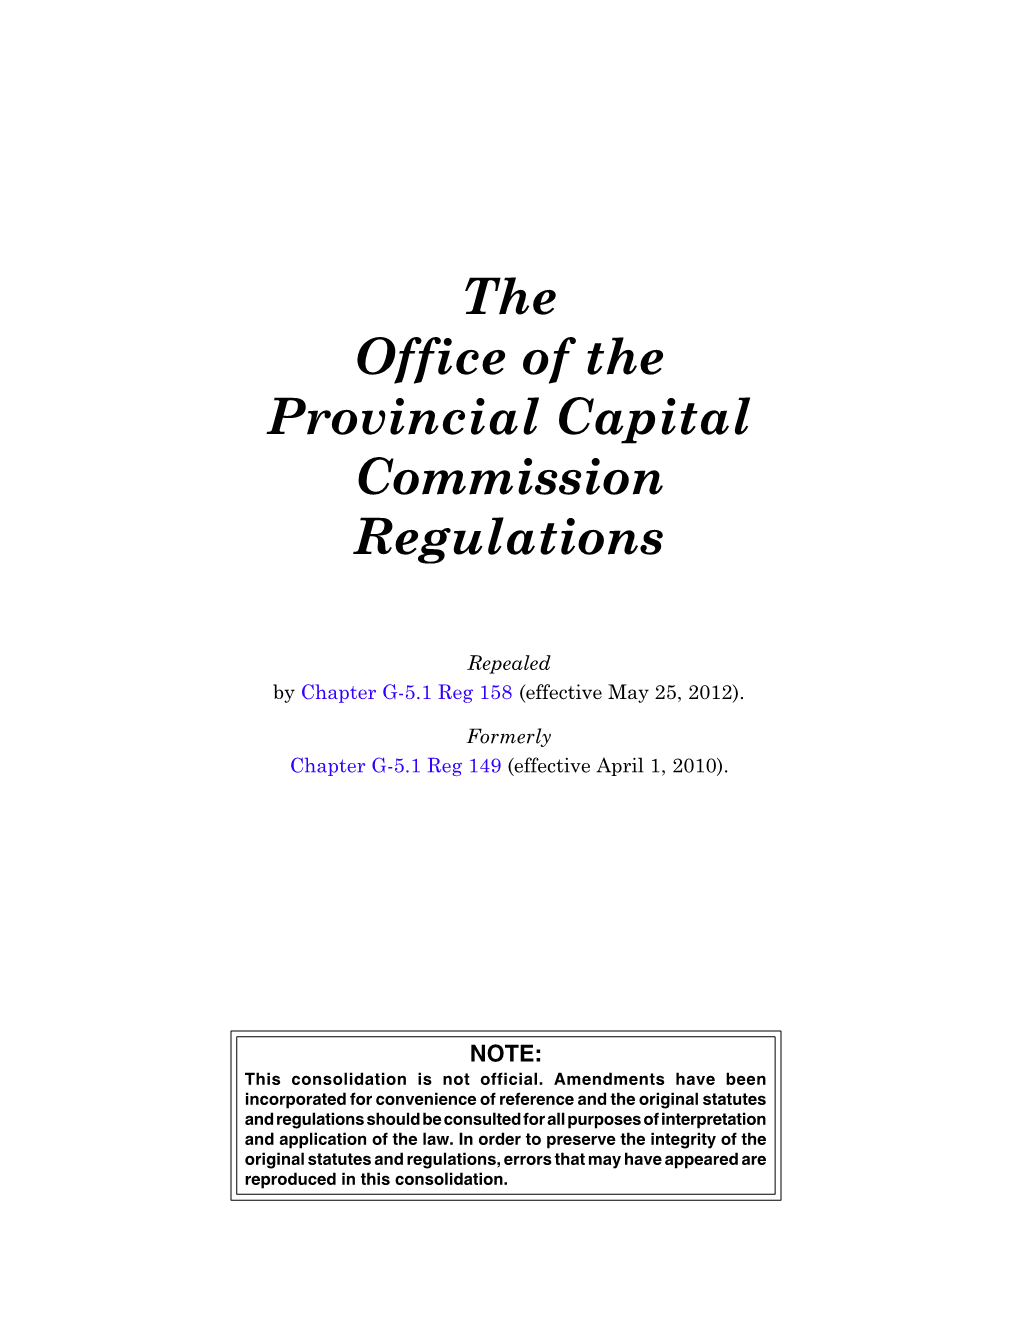 The Office of the Provincial Capital Commission Regulations